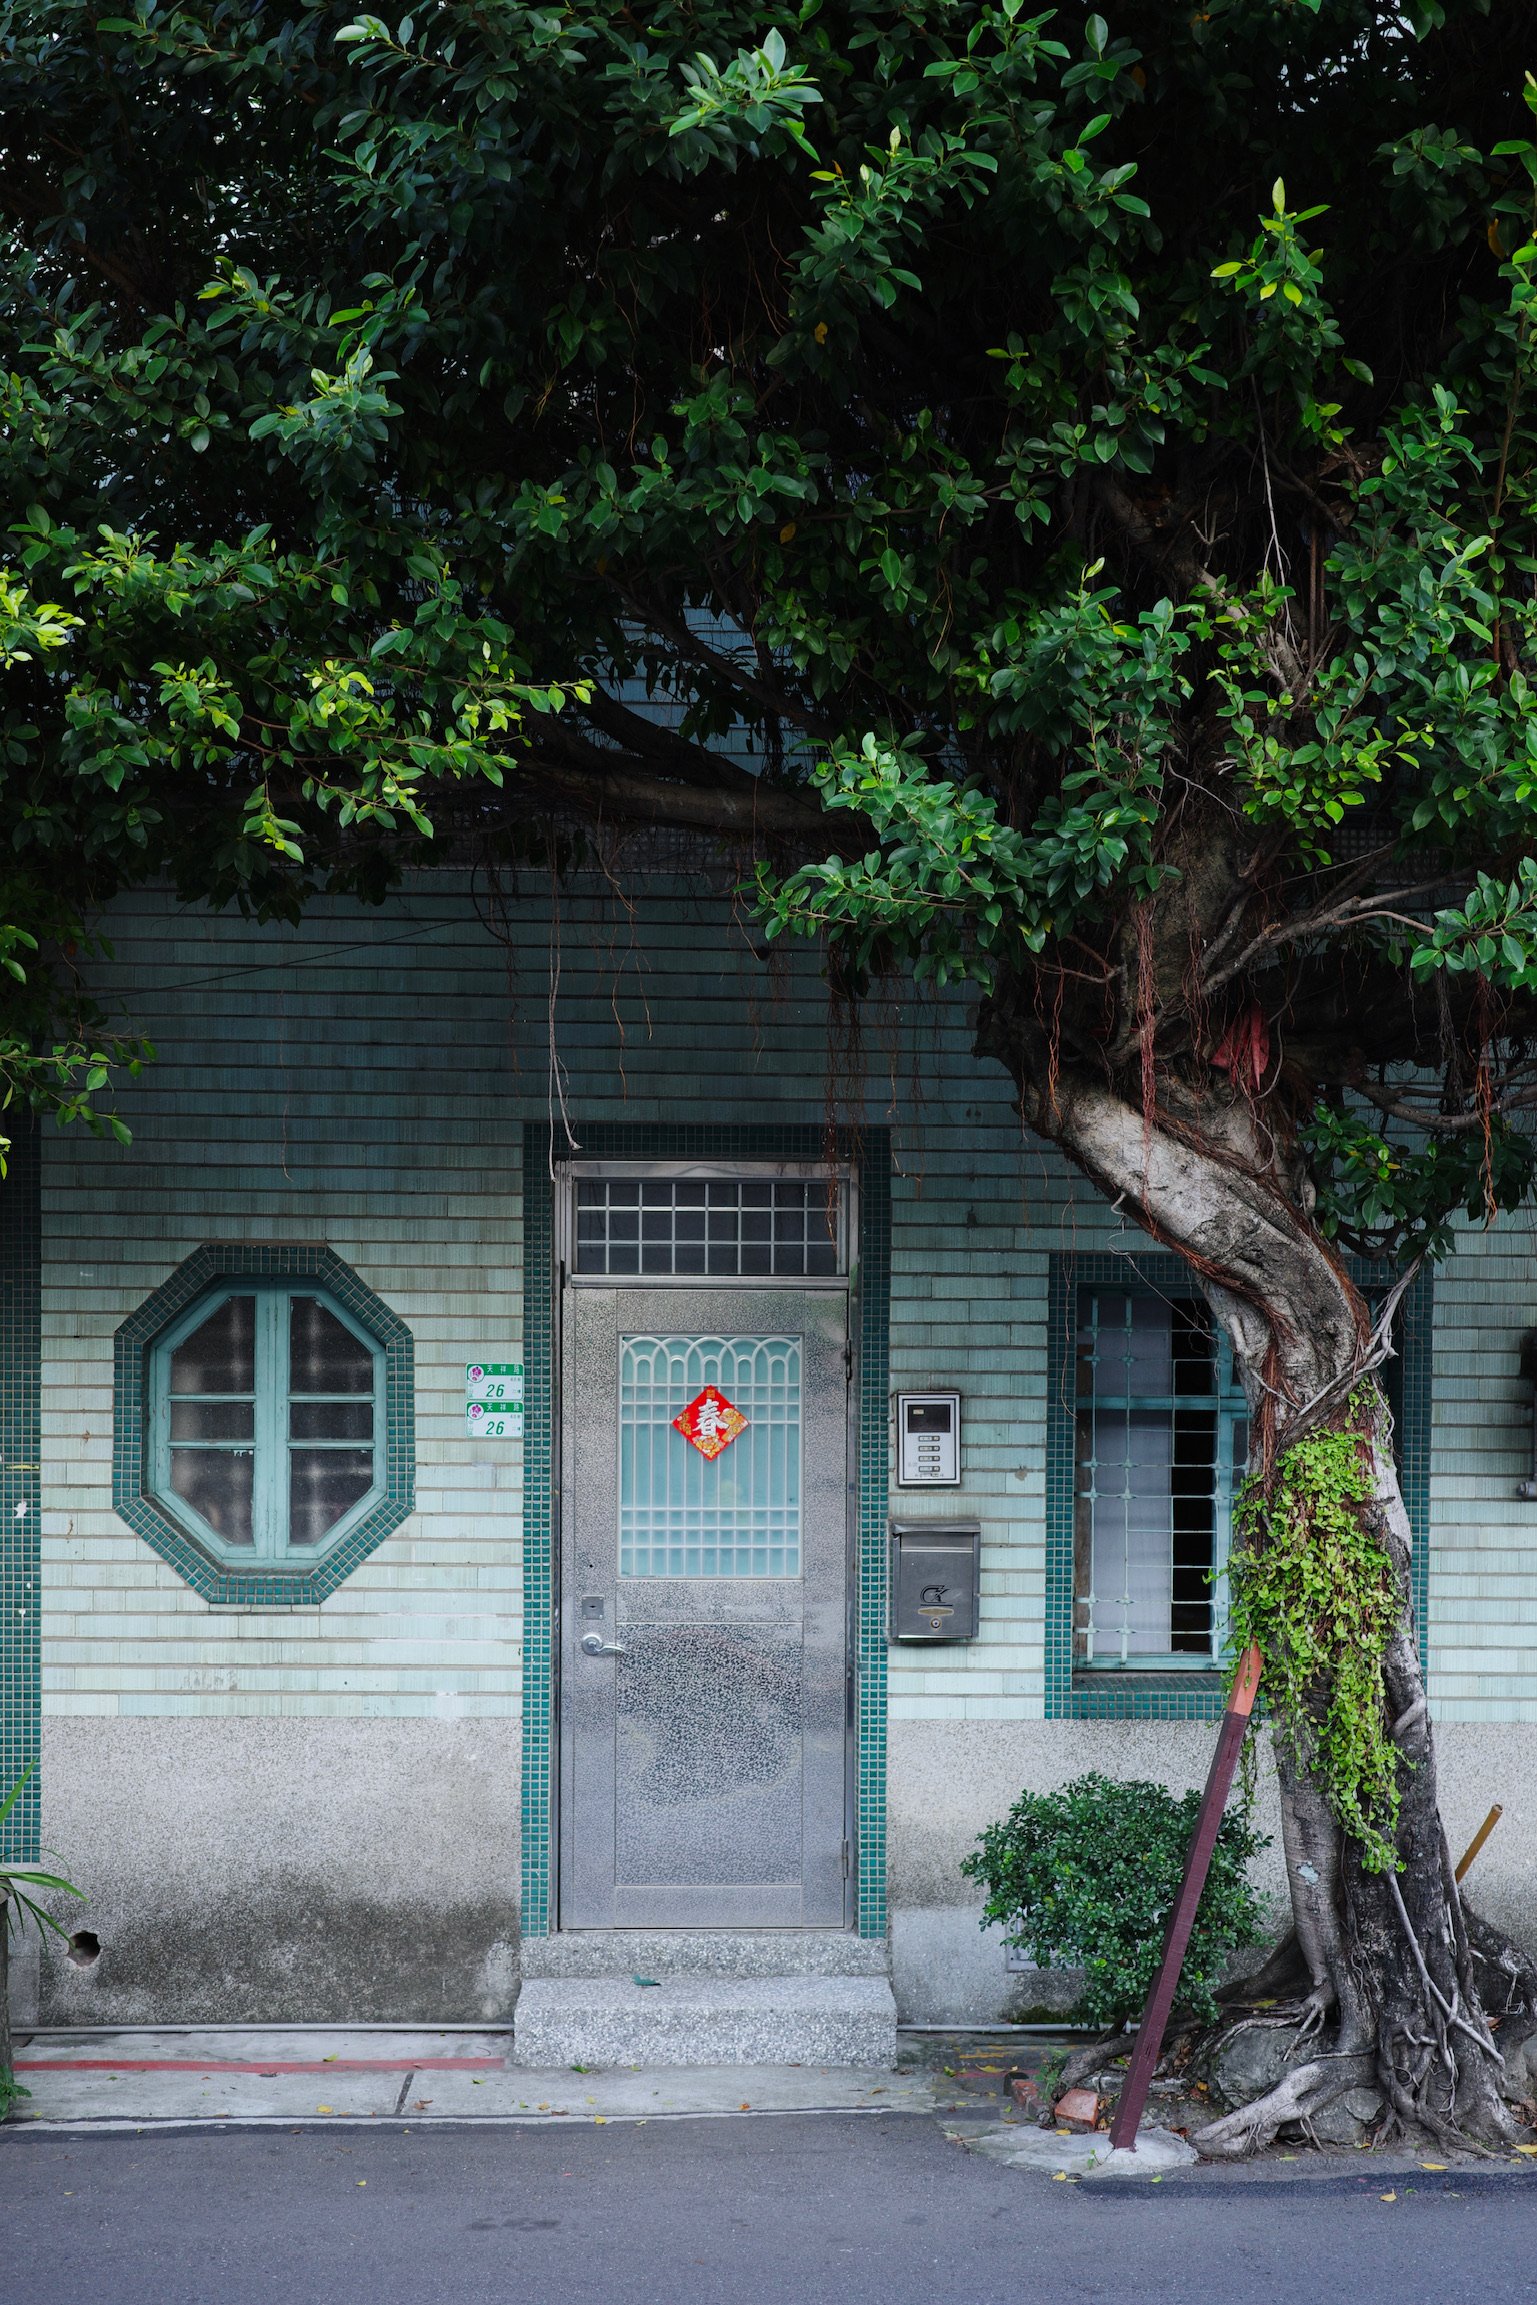 Teal tiled house with a metal door, hexagon window, traditional taiwanese window frames, and an old tree.